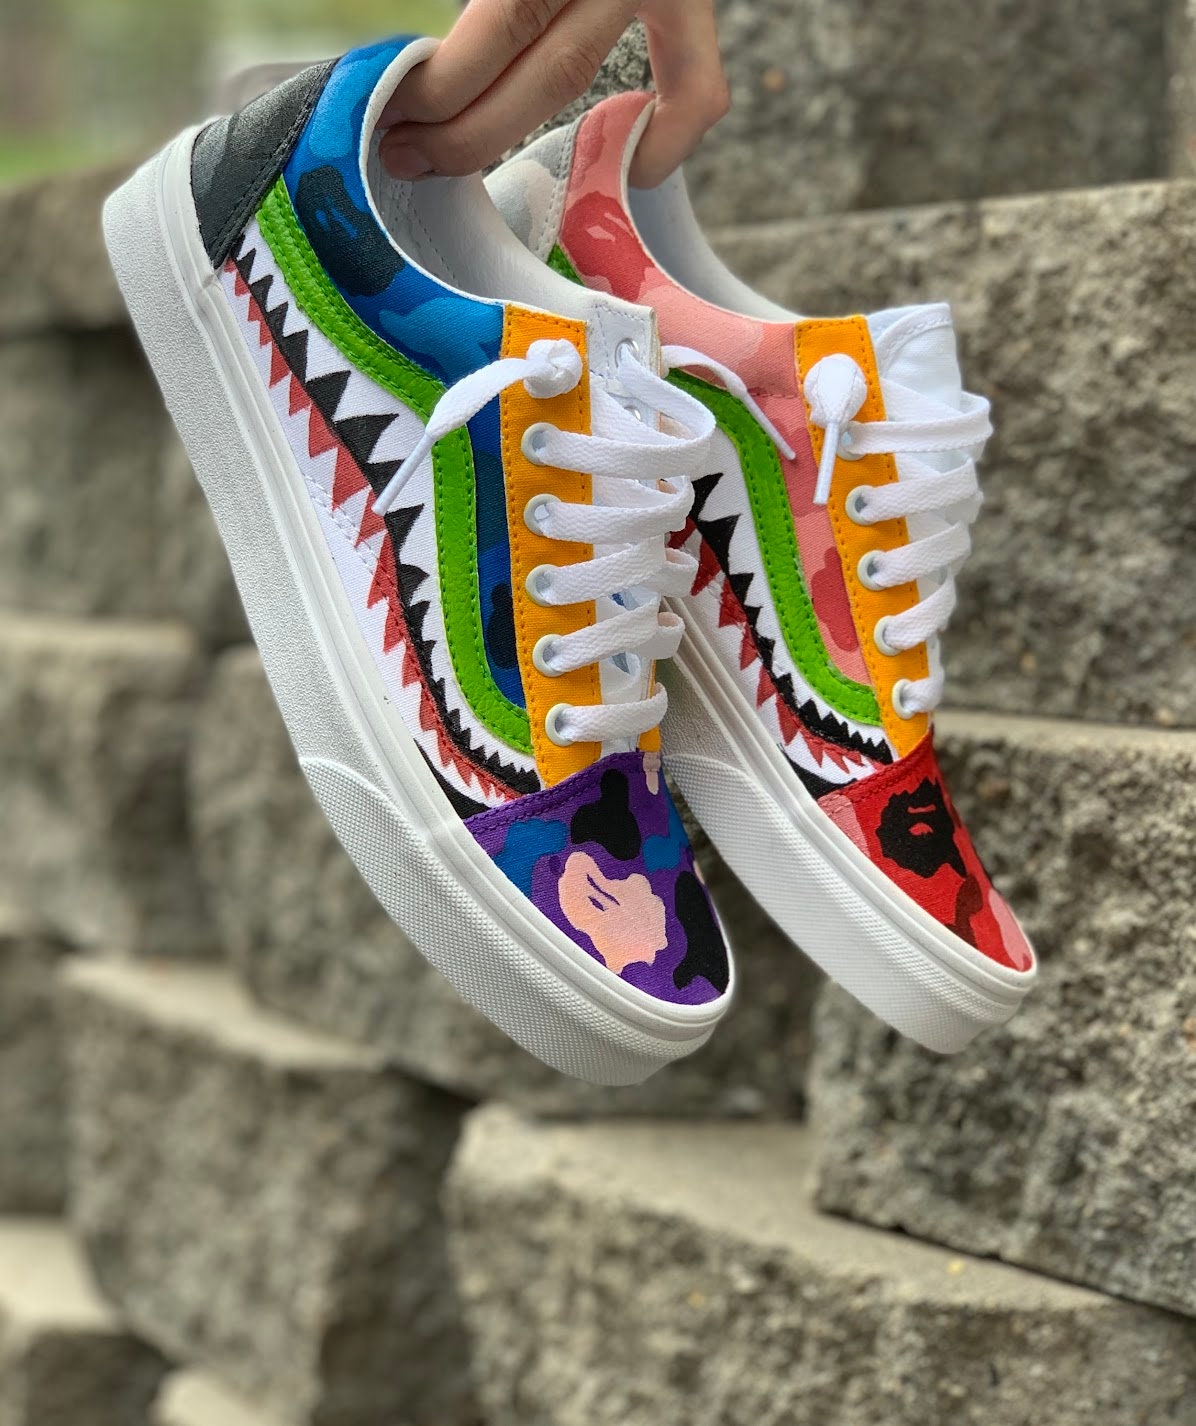 White Old Skool x Bape Custom Handmade Uni-Sex Shoes By Patch Collection :  Handmade Products 